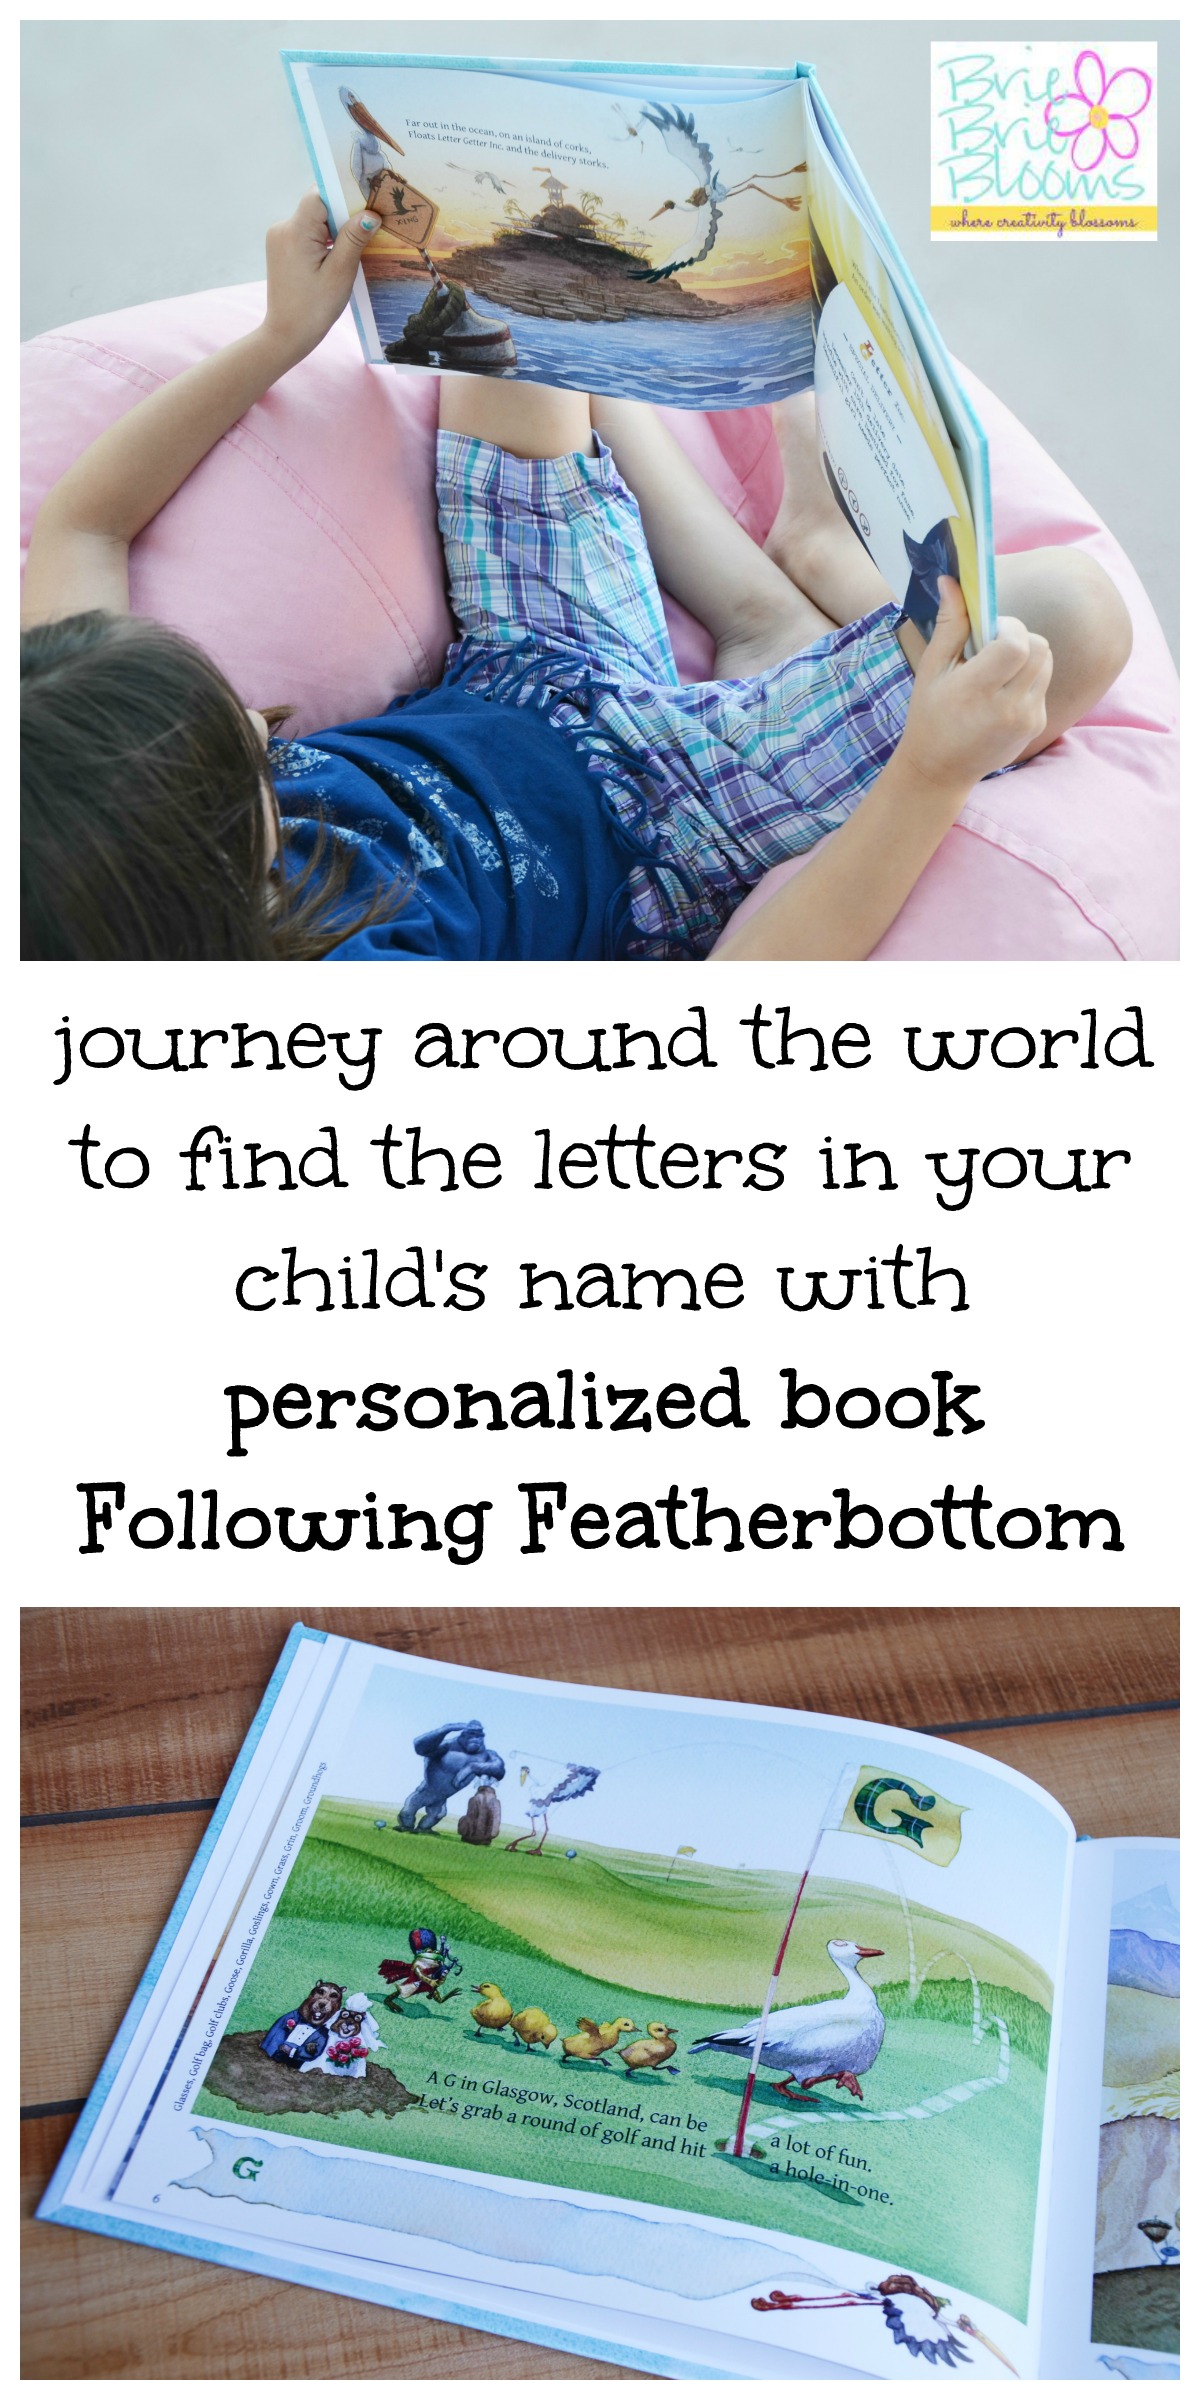 Following-Featherbottom-personalized-name-book